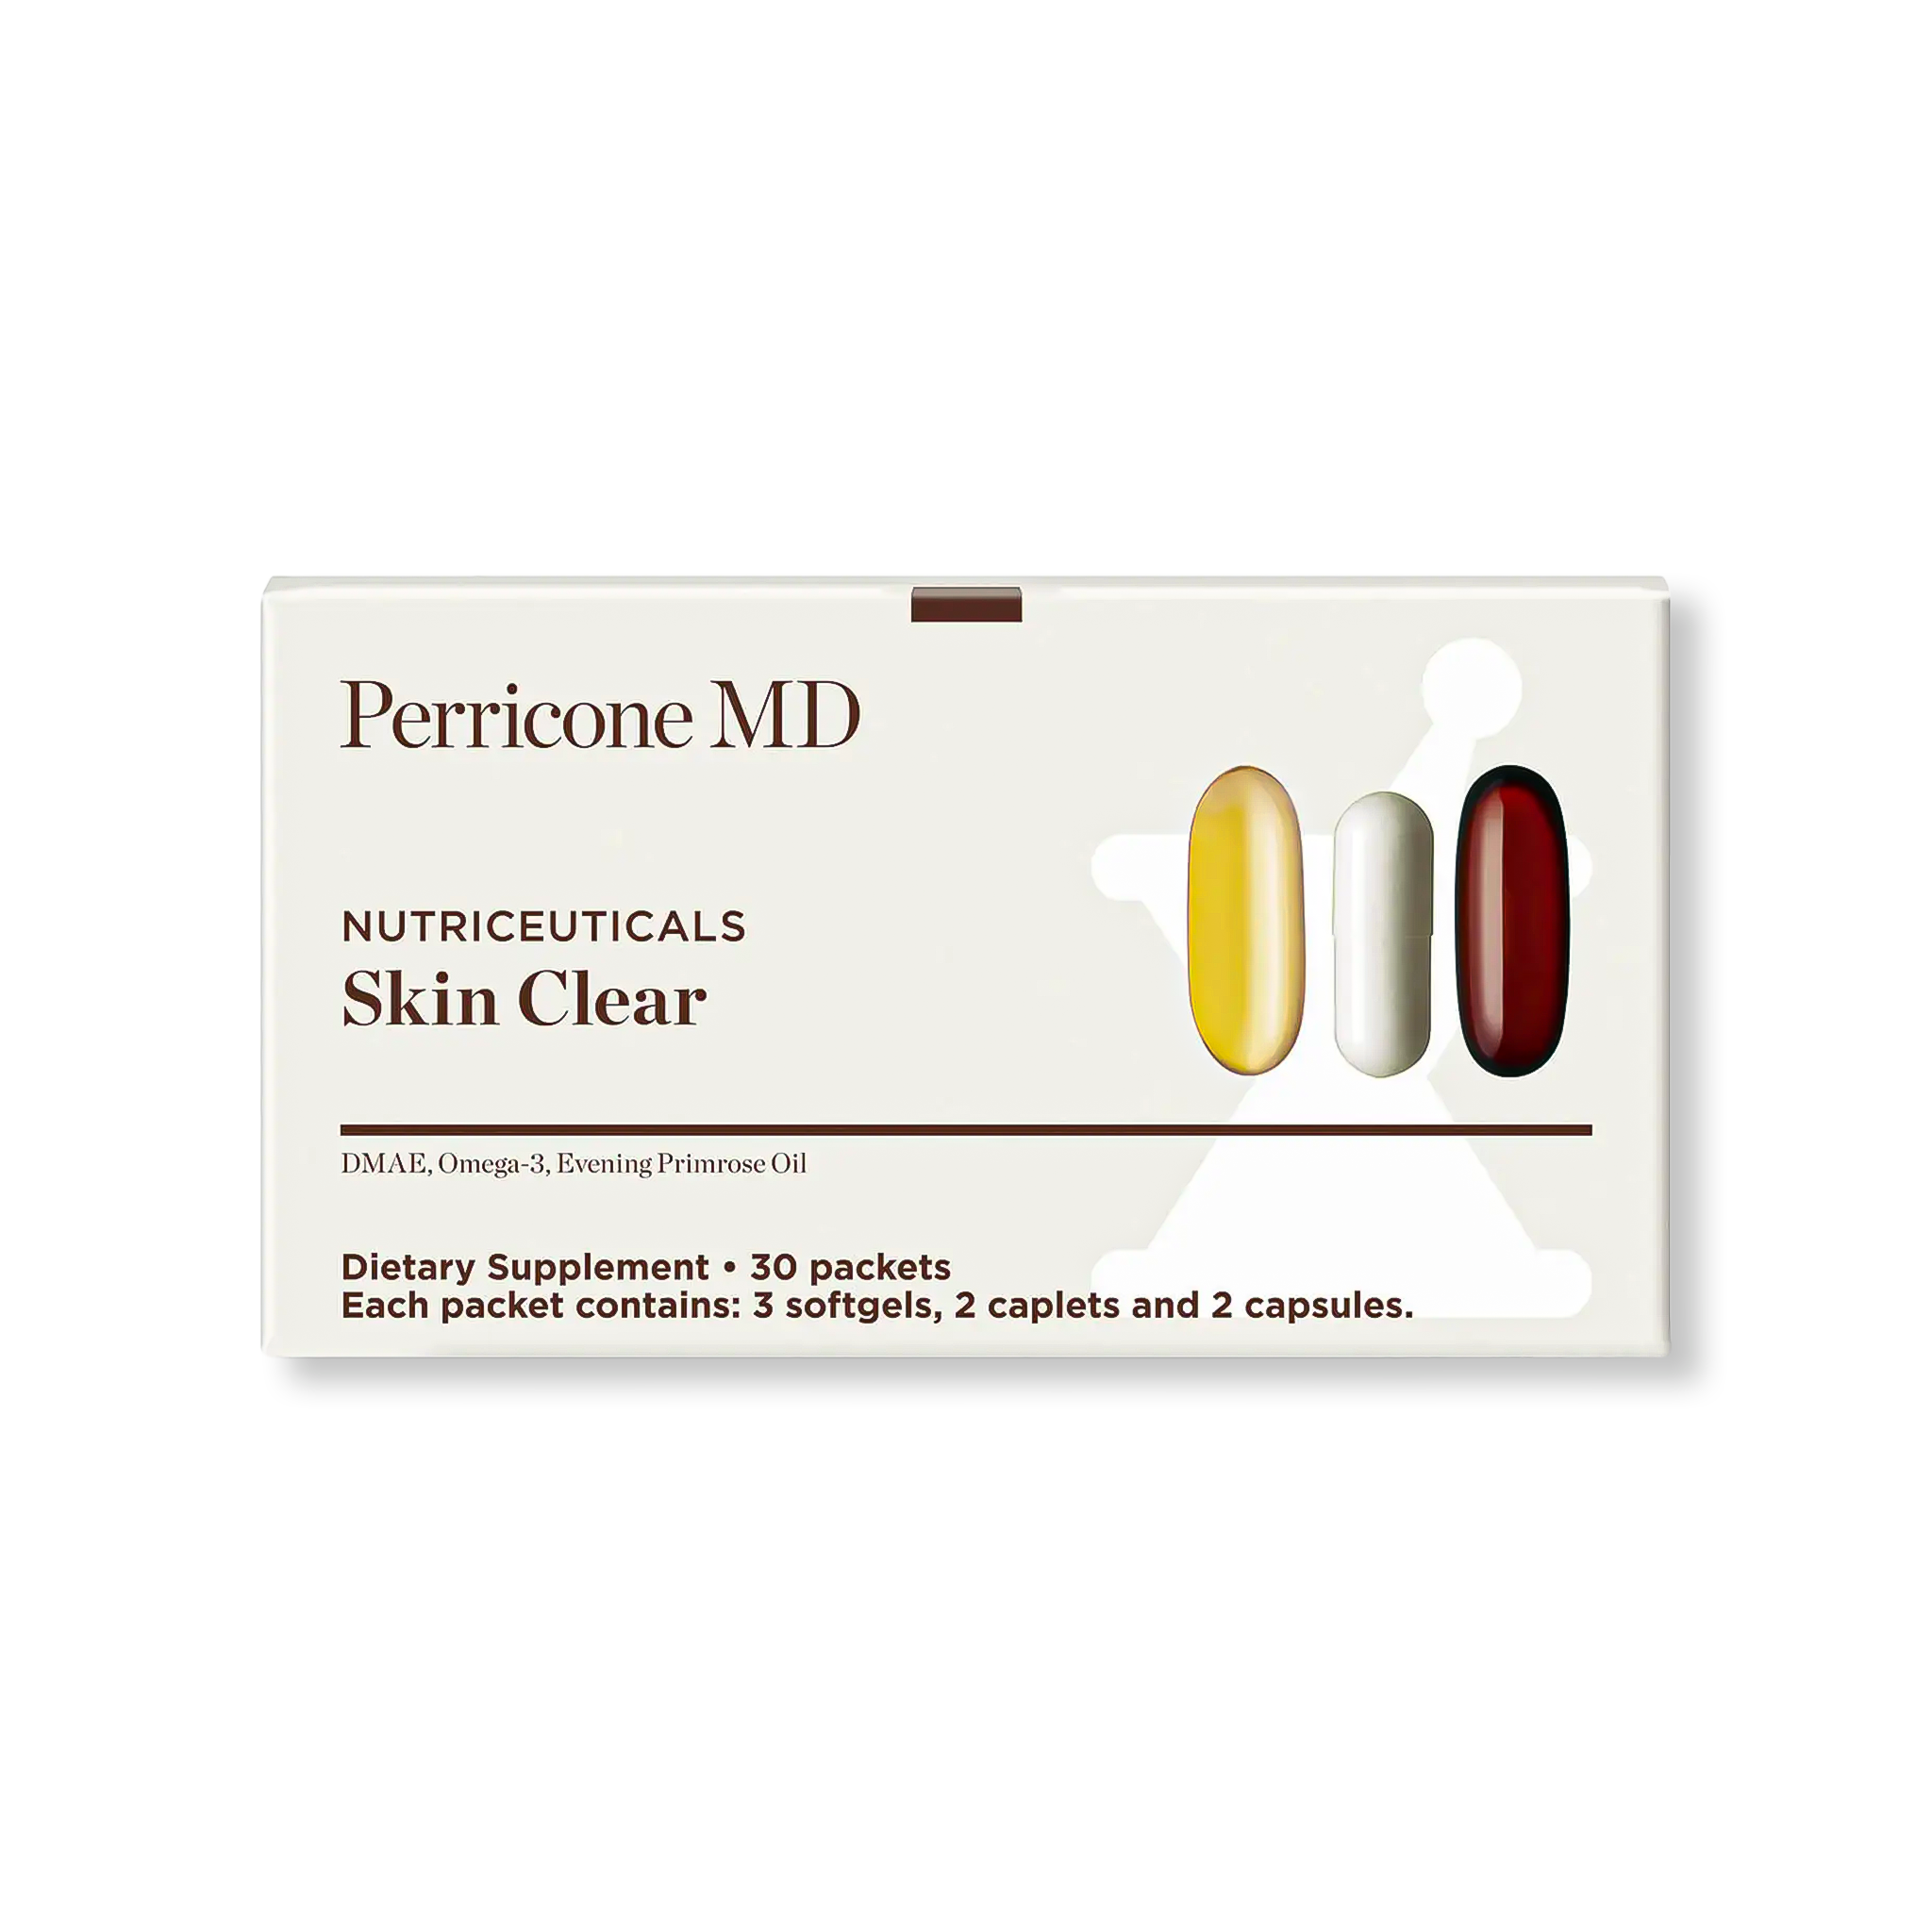 Perricone MD Skin Clear Supplements 30 day